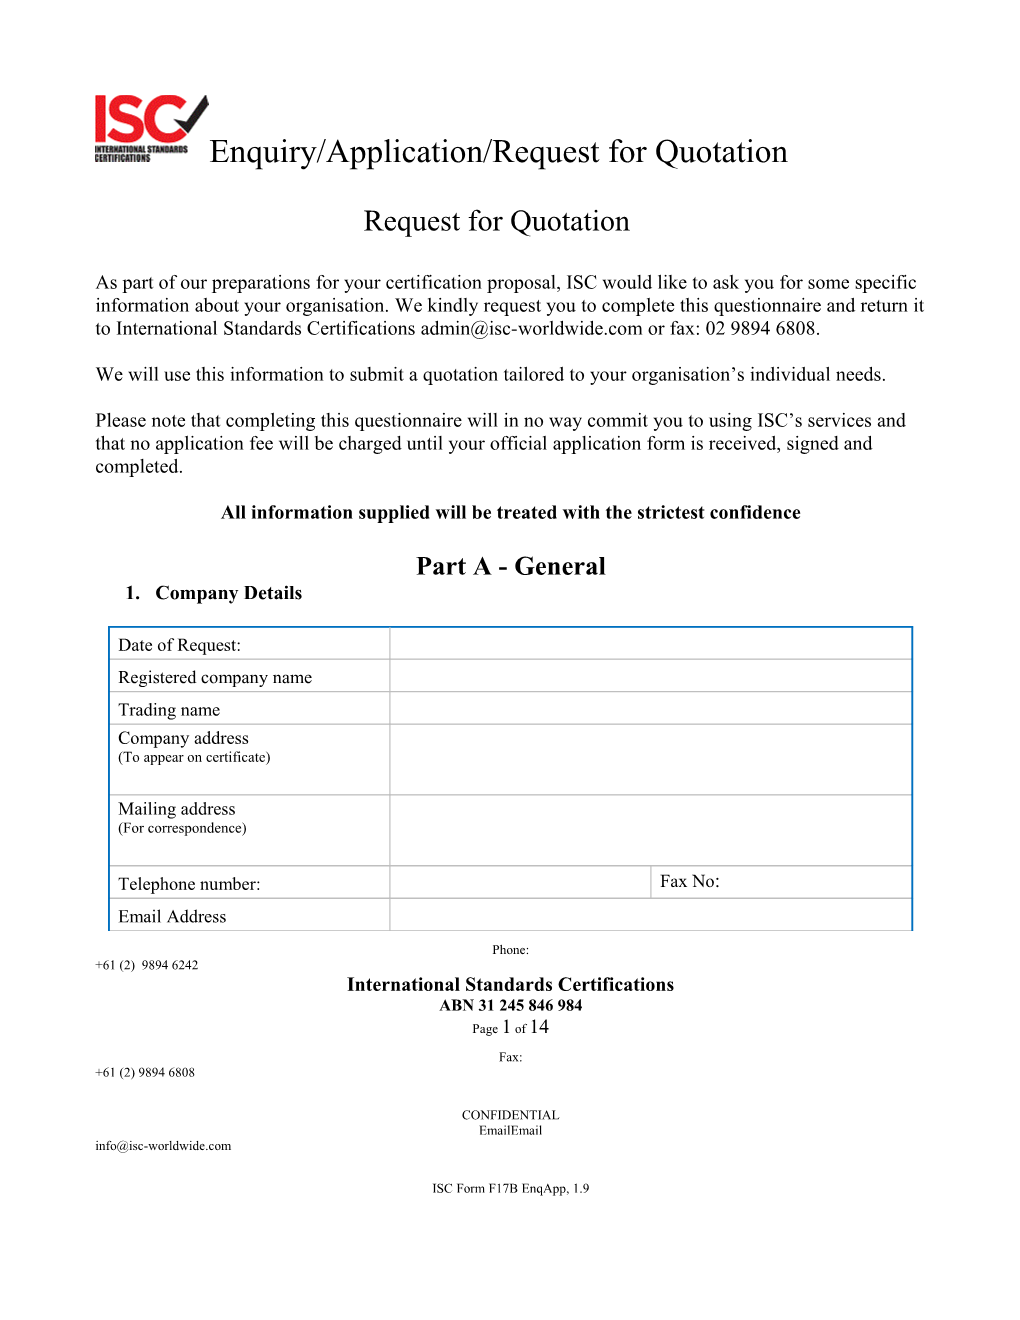 Request for Quotation IT Related